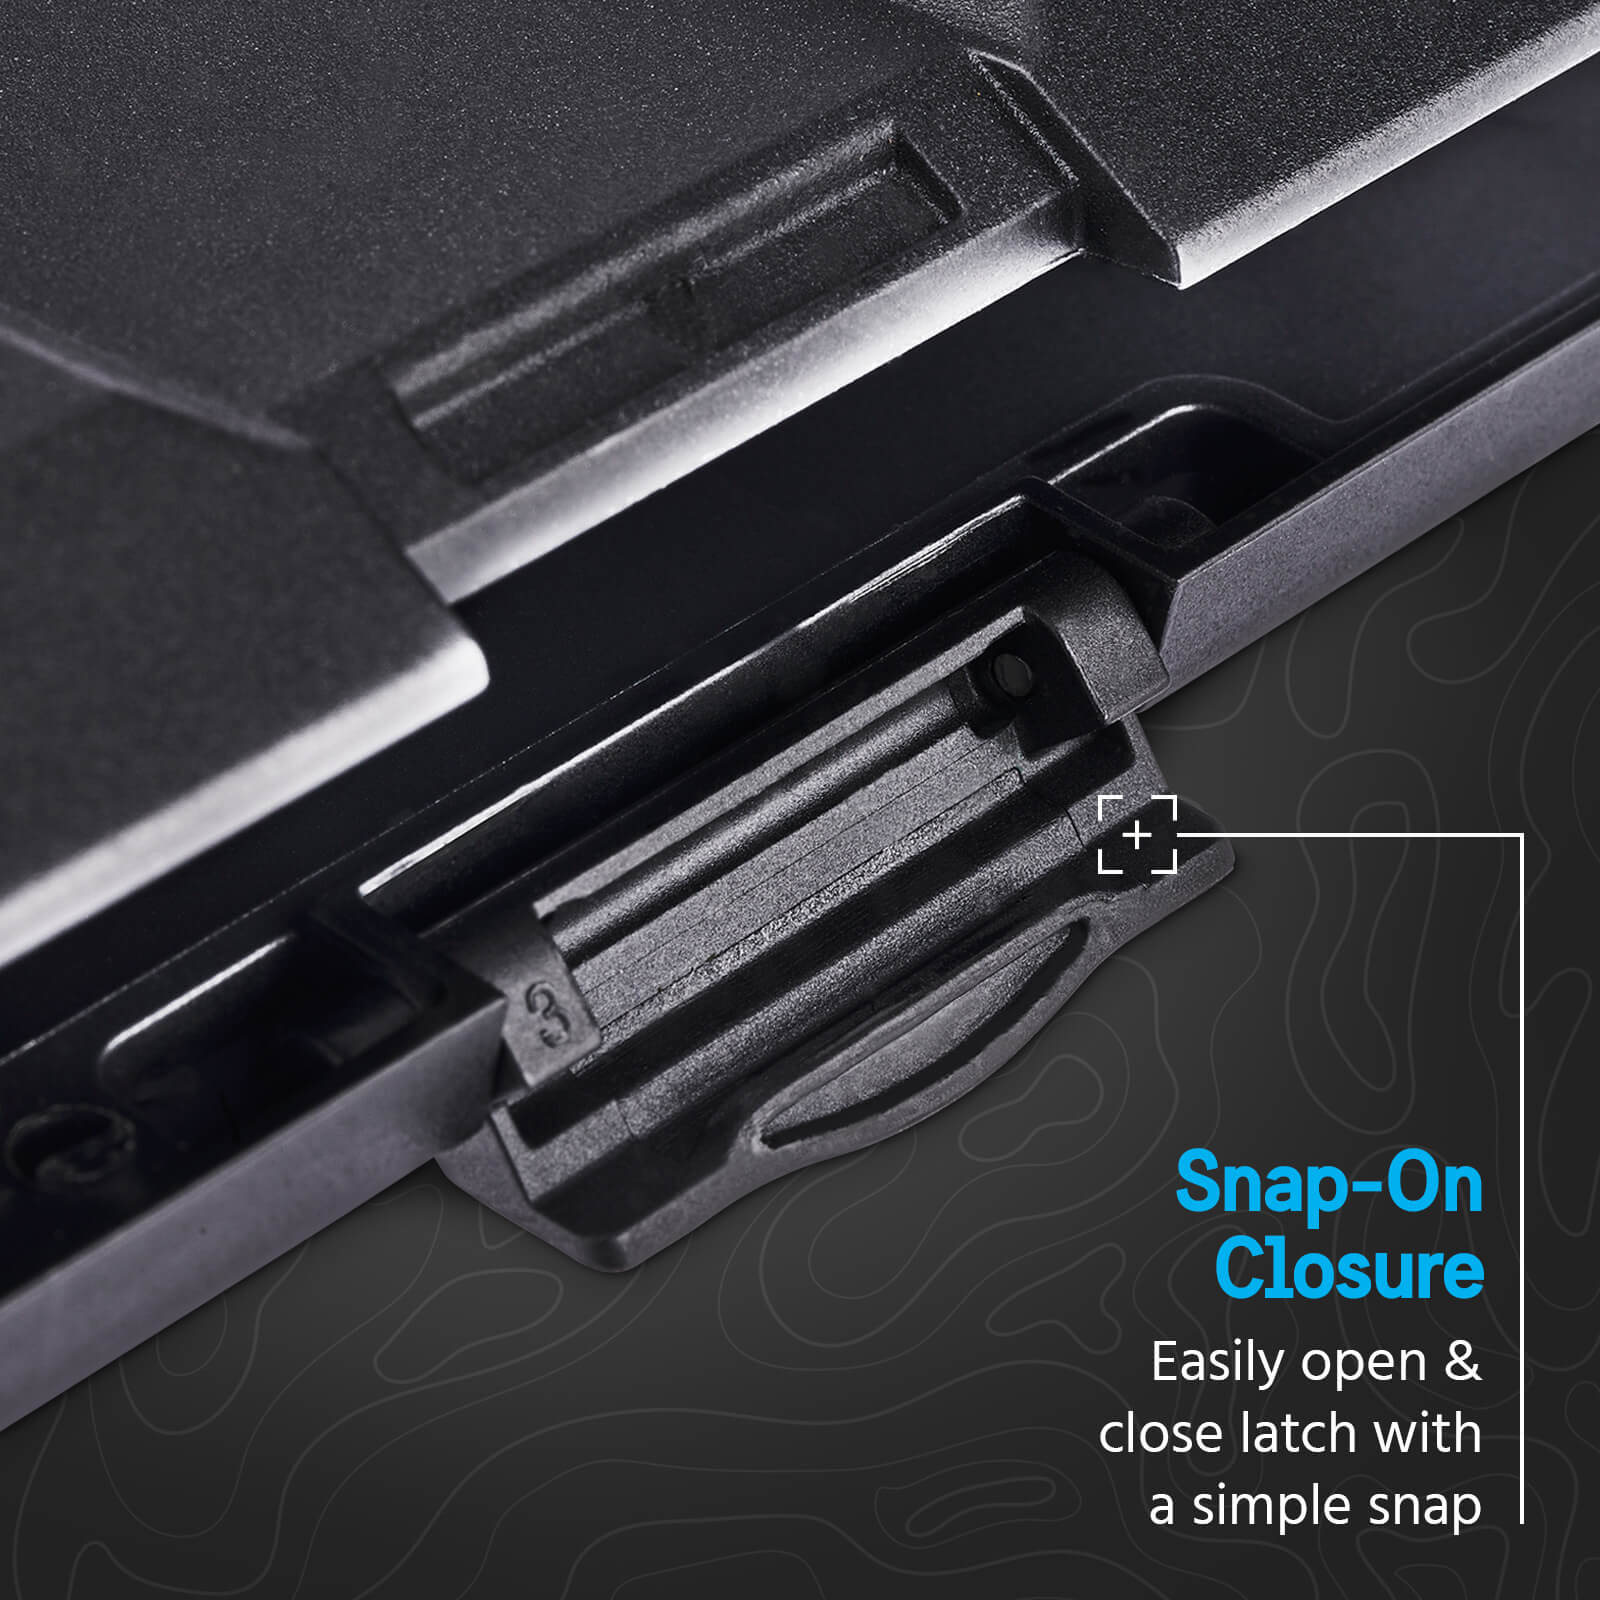 Snap-in closure. Easily open and close latch with a simple snap, color::Black